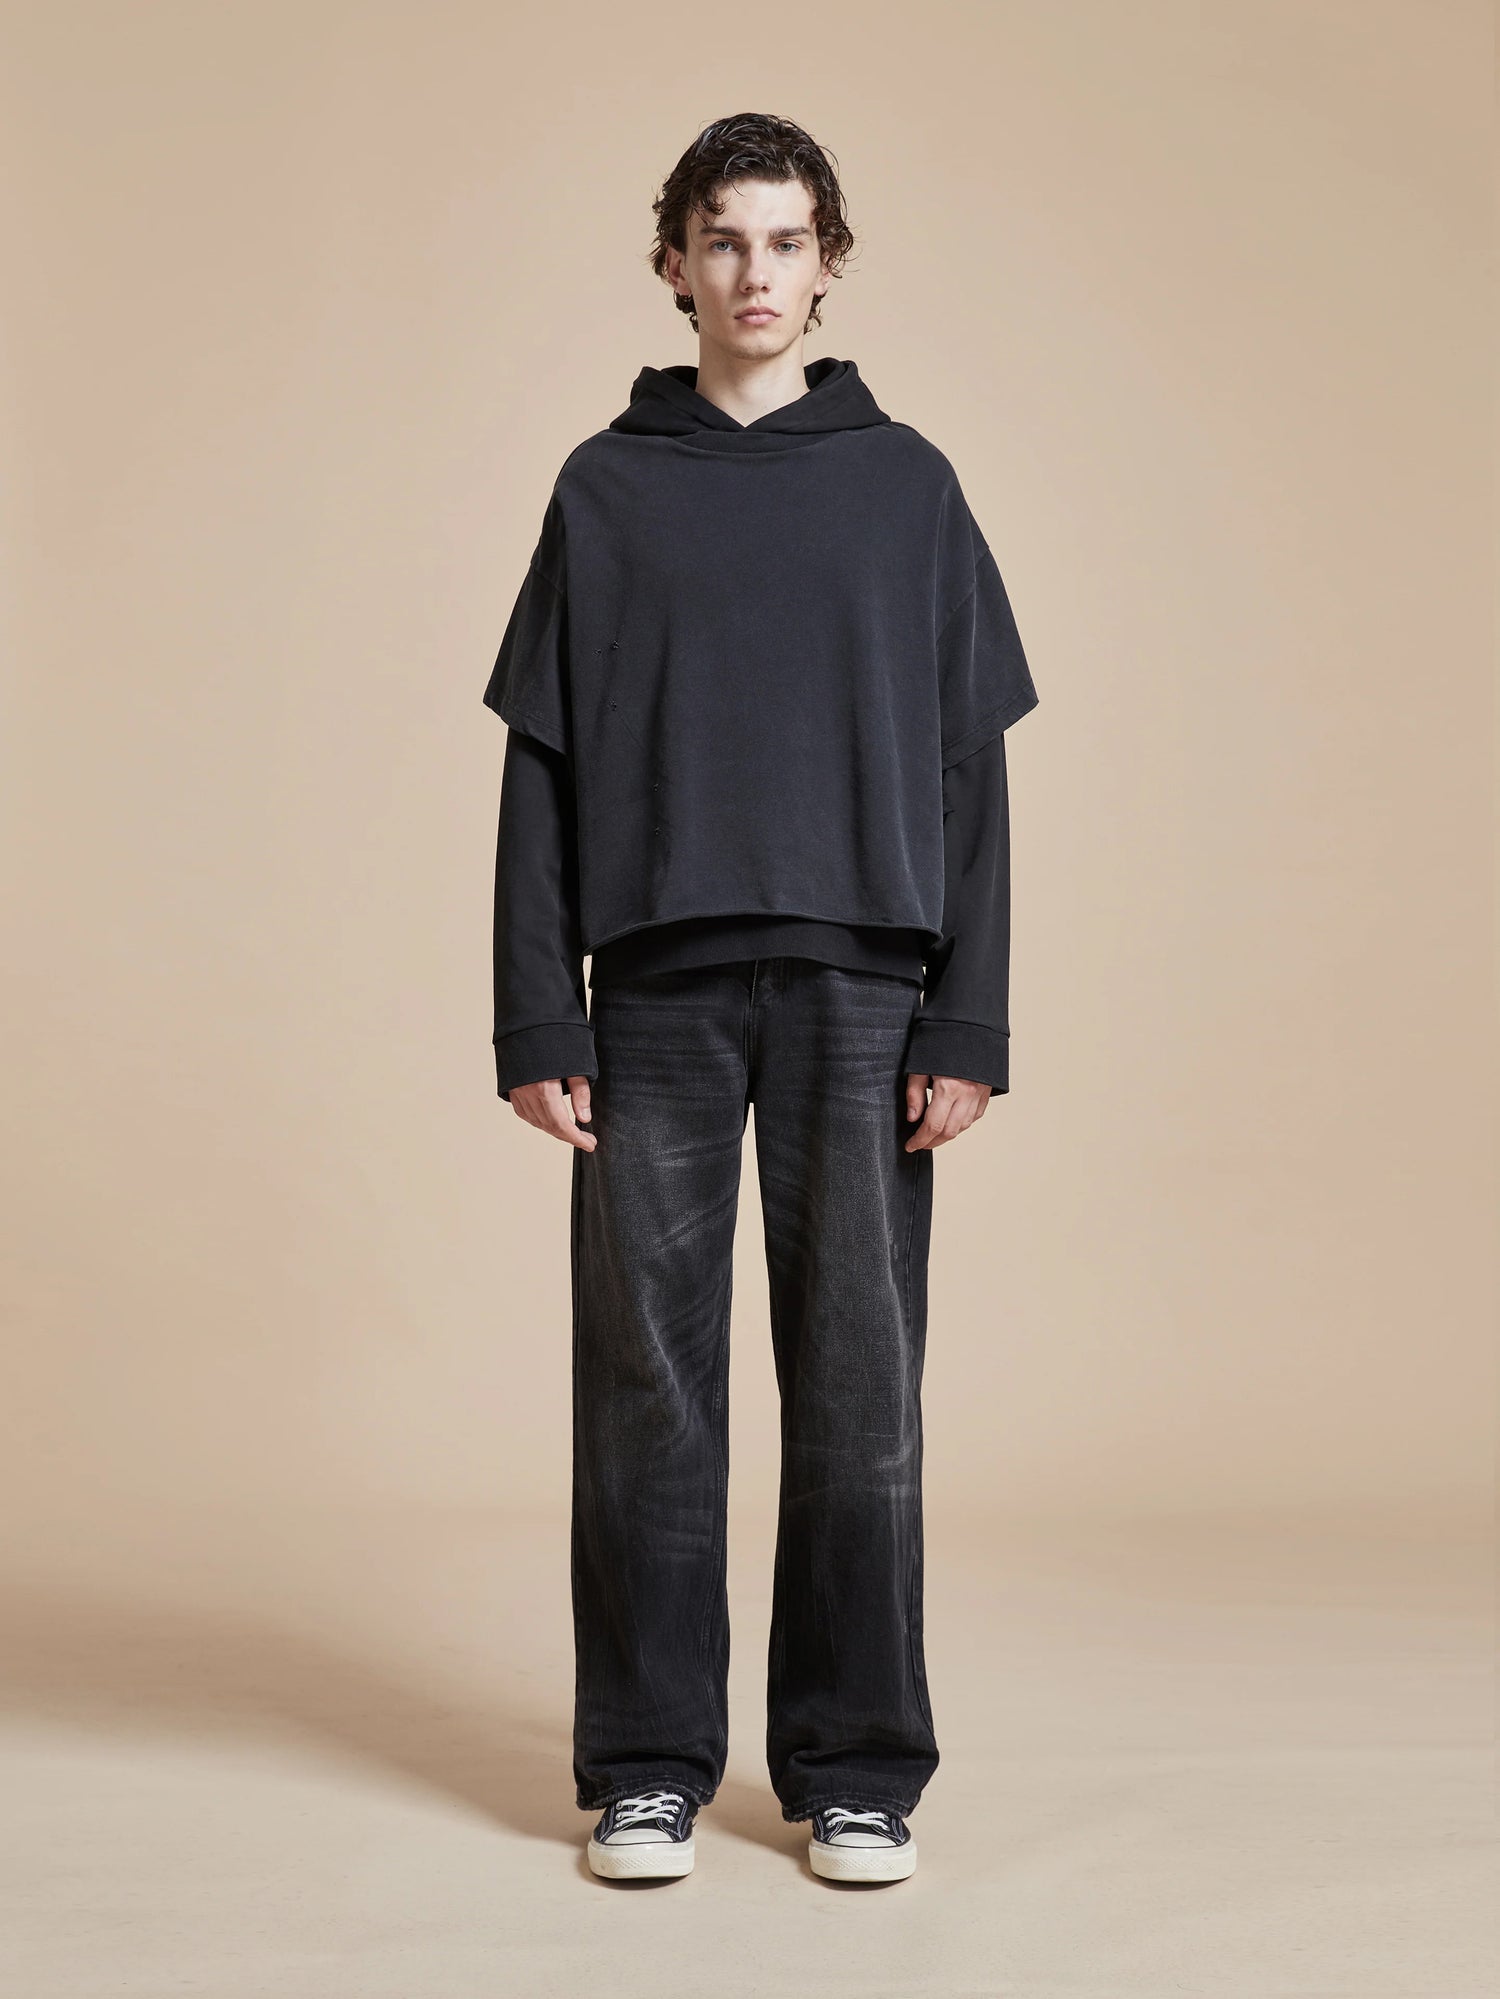 The model is wearing a Found Double Layer Hoodie in black.